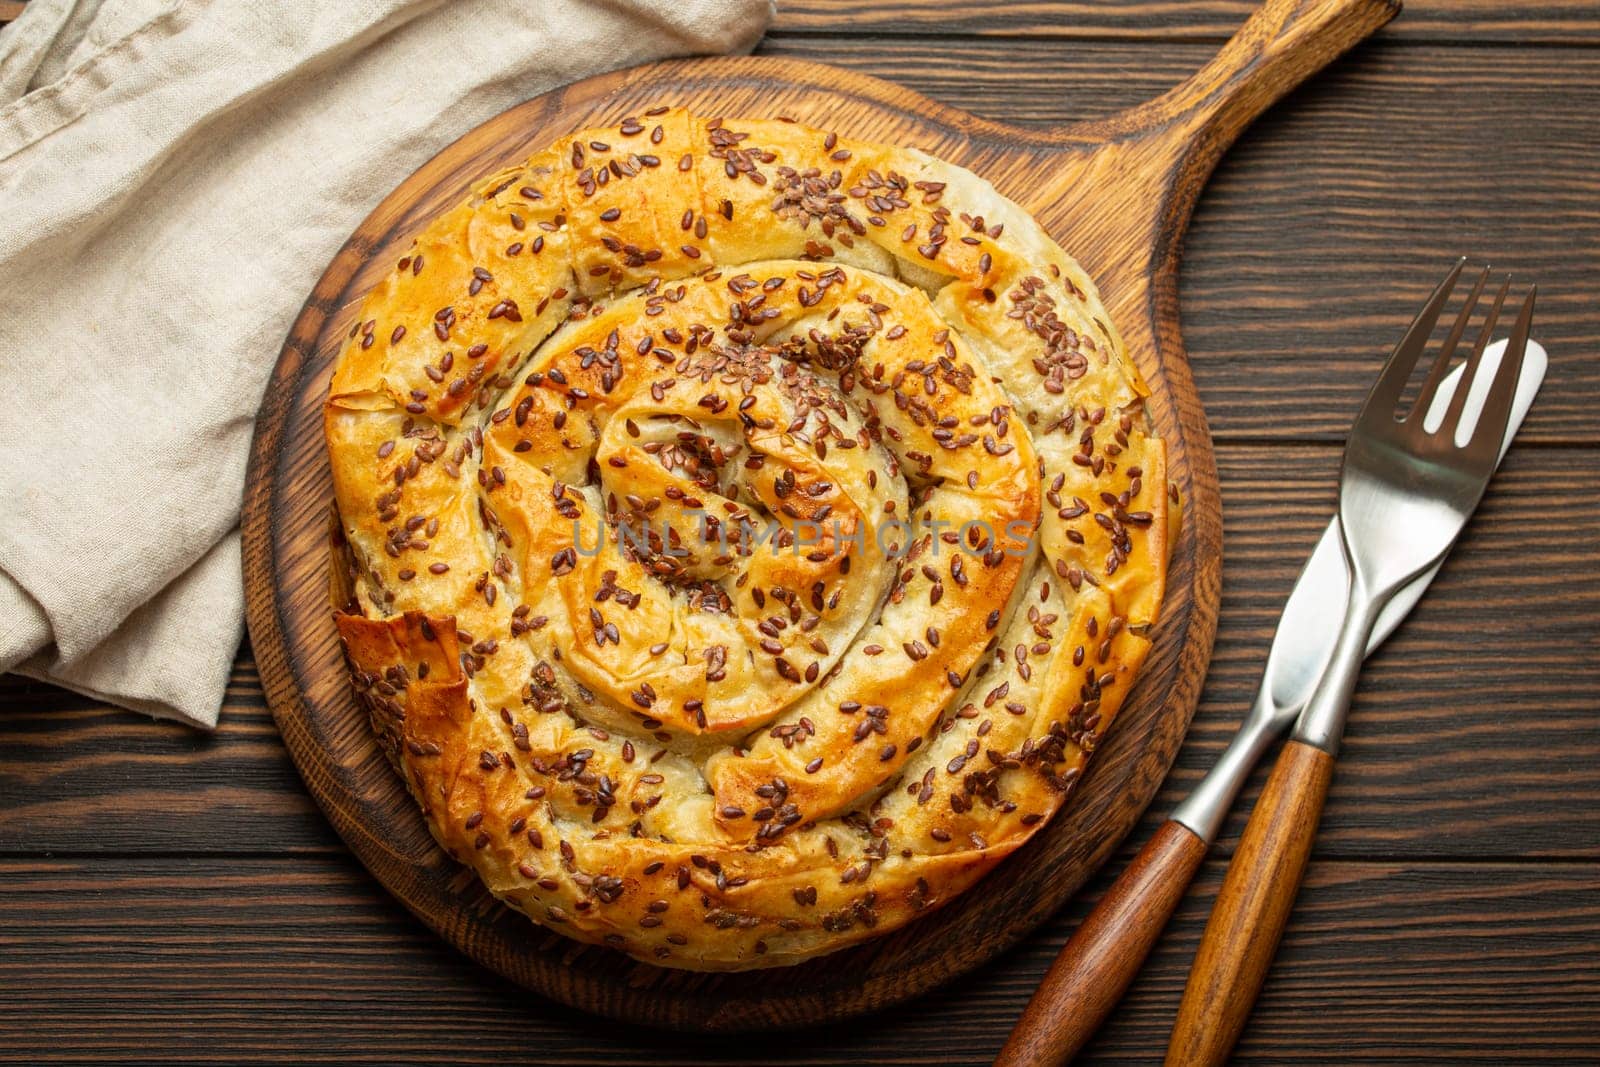 Burek made of phyllo dough with filling on cutting board, dark brown wooden rustic background top view. Traditional savoury spiral pie of Balkans, Middle East and Central Asia by its_al_dente